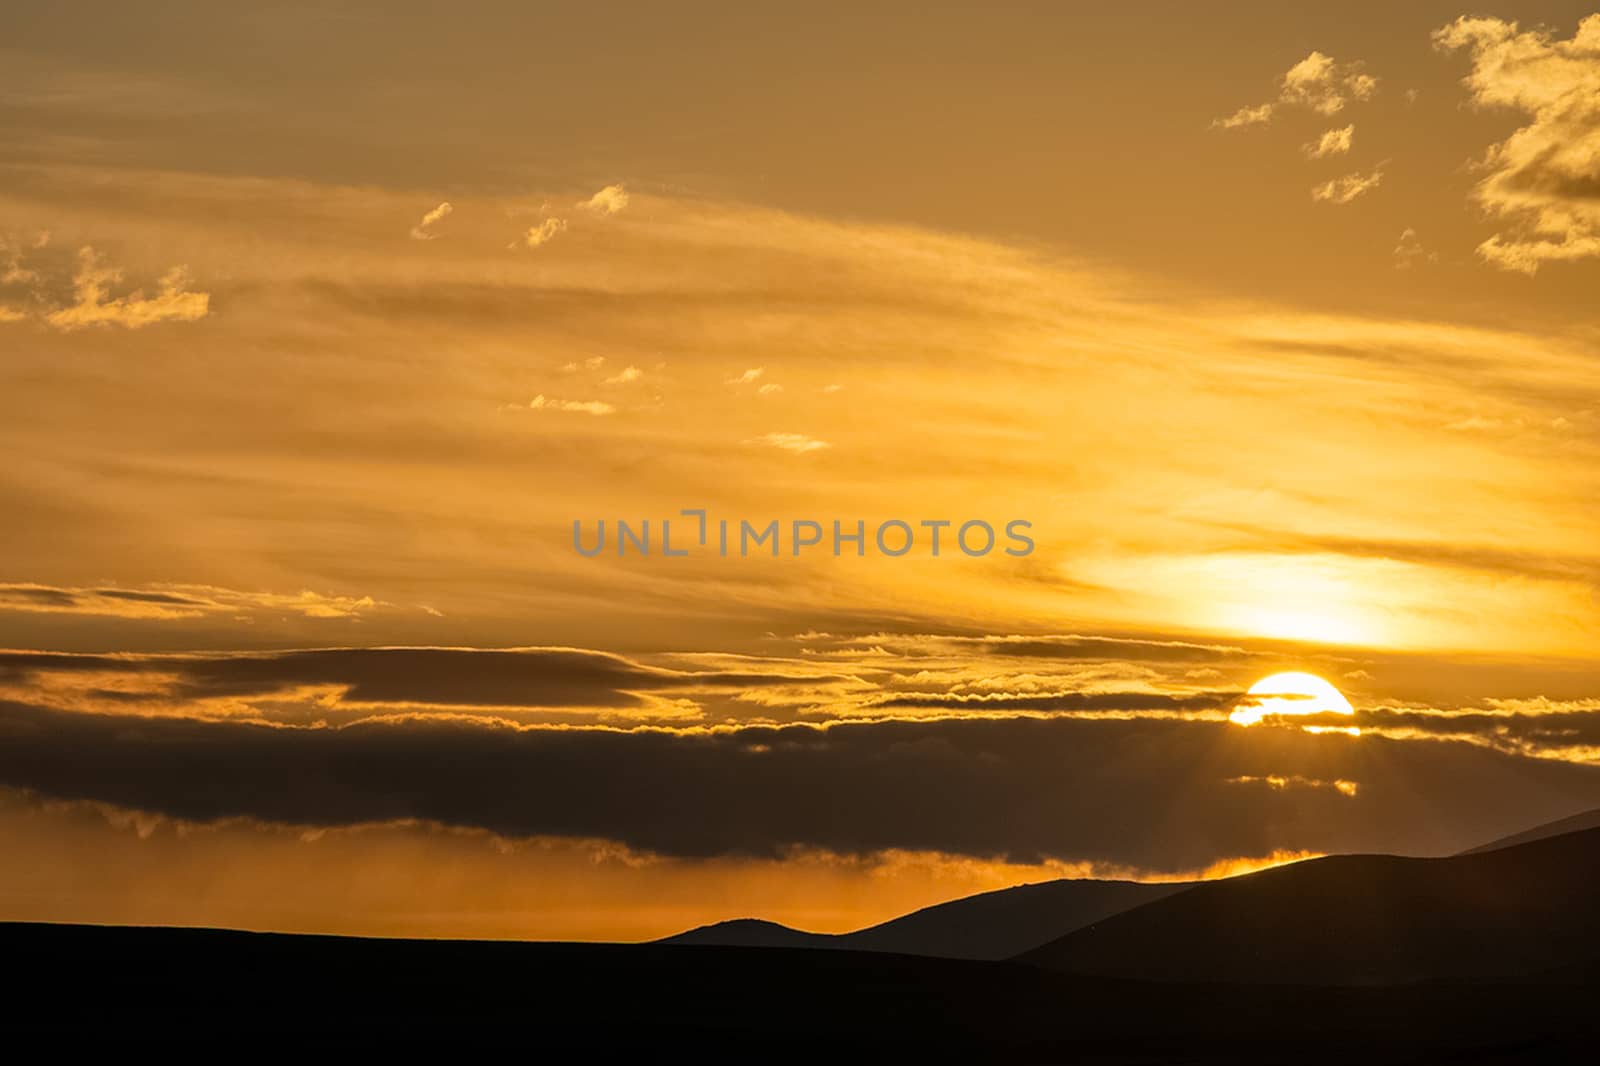 Sunset in the Altai Mountains. Nature's Altai Landscape of Nature